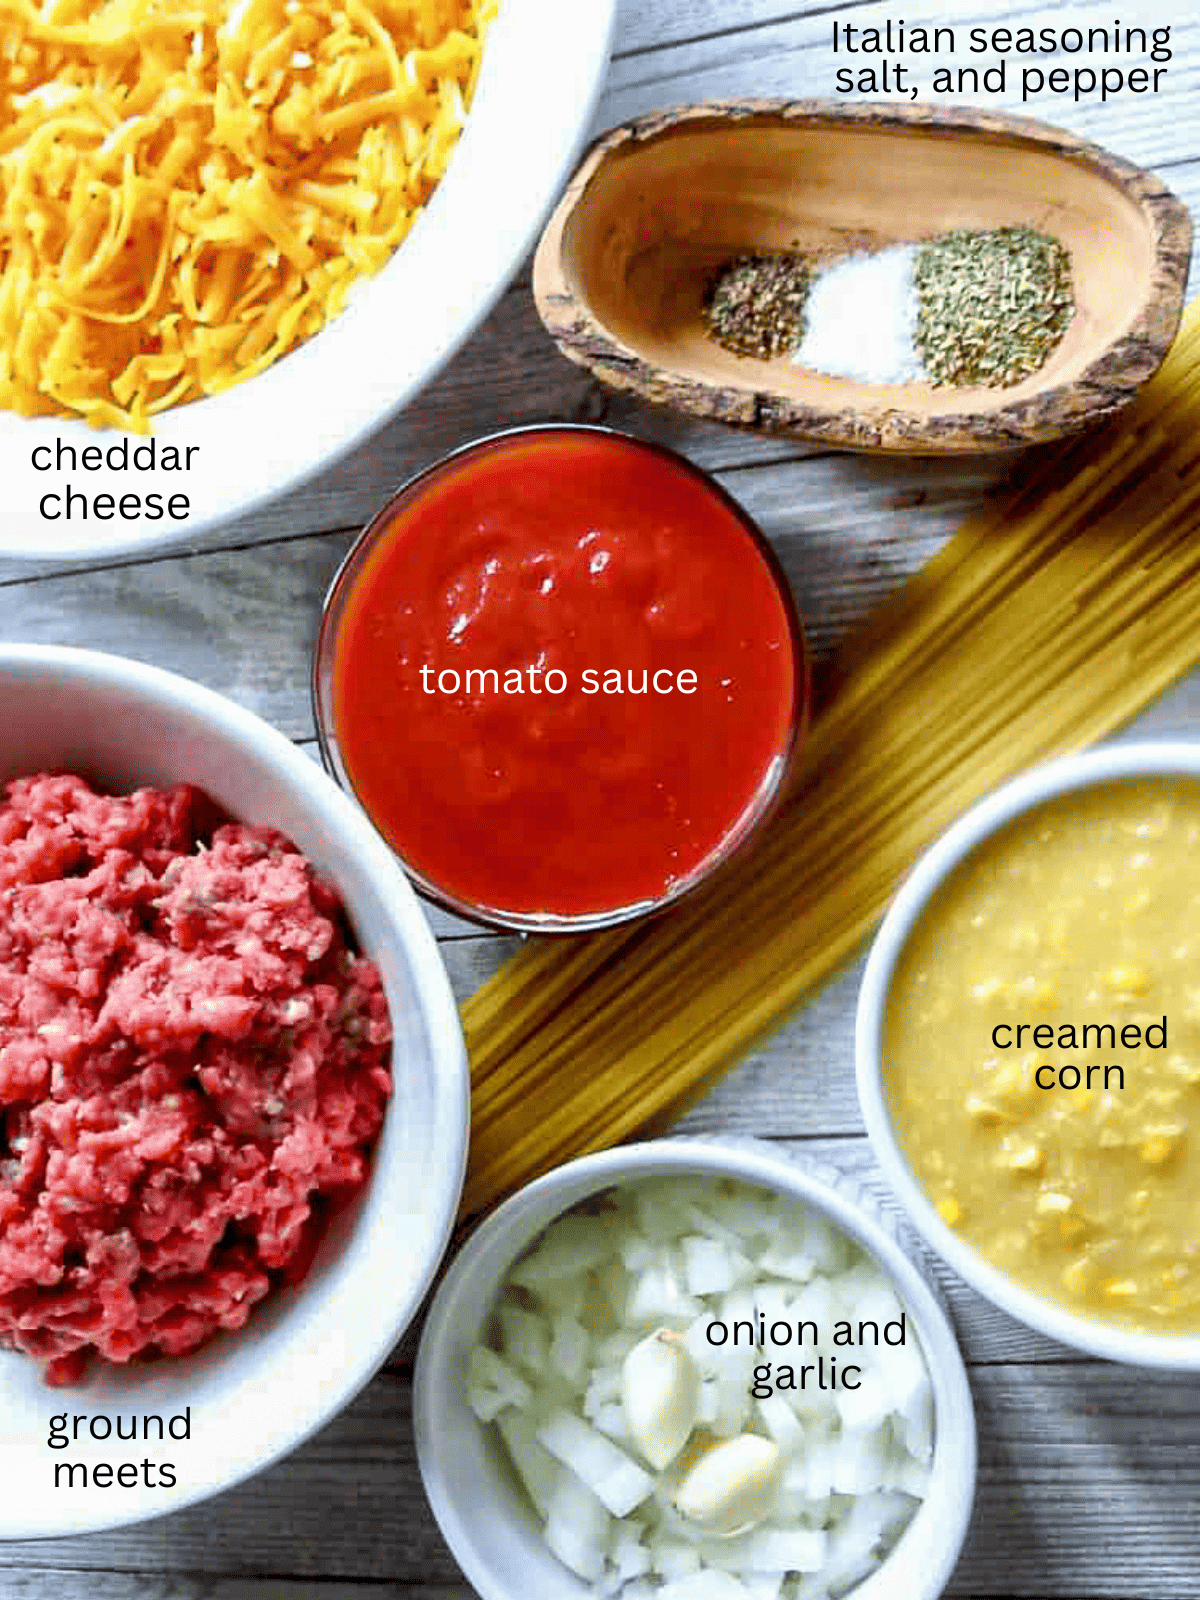 Ingredients for a pasta dish with ground meat, onions, tomato sauce, corn, seasoning, and cheese.